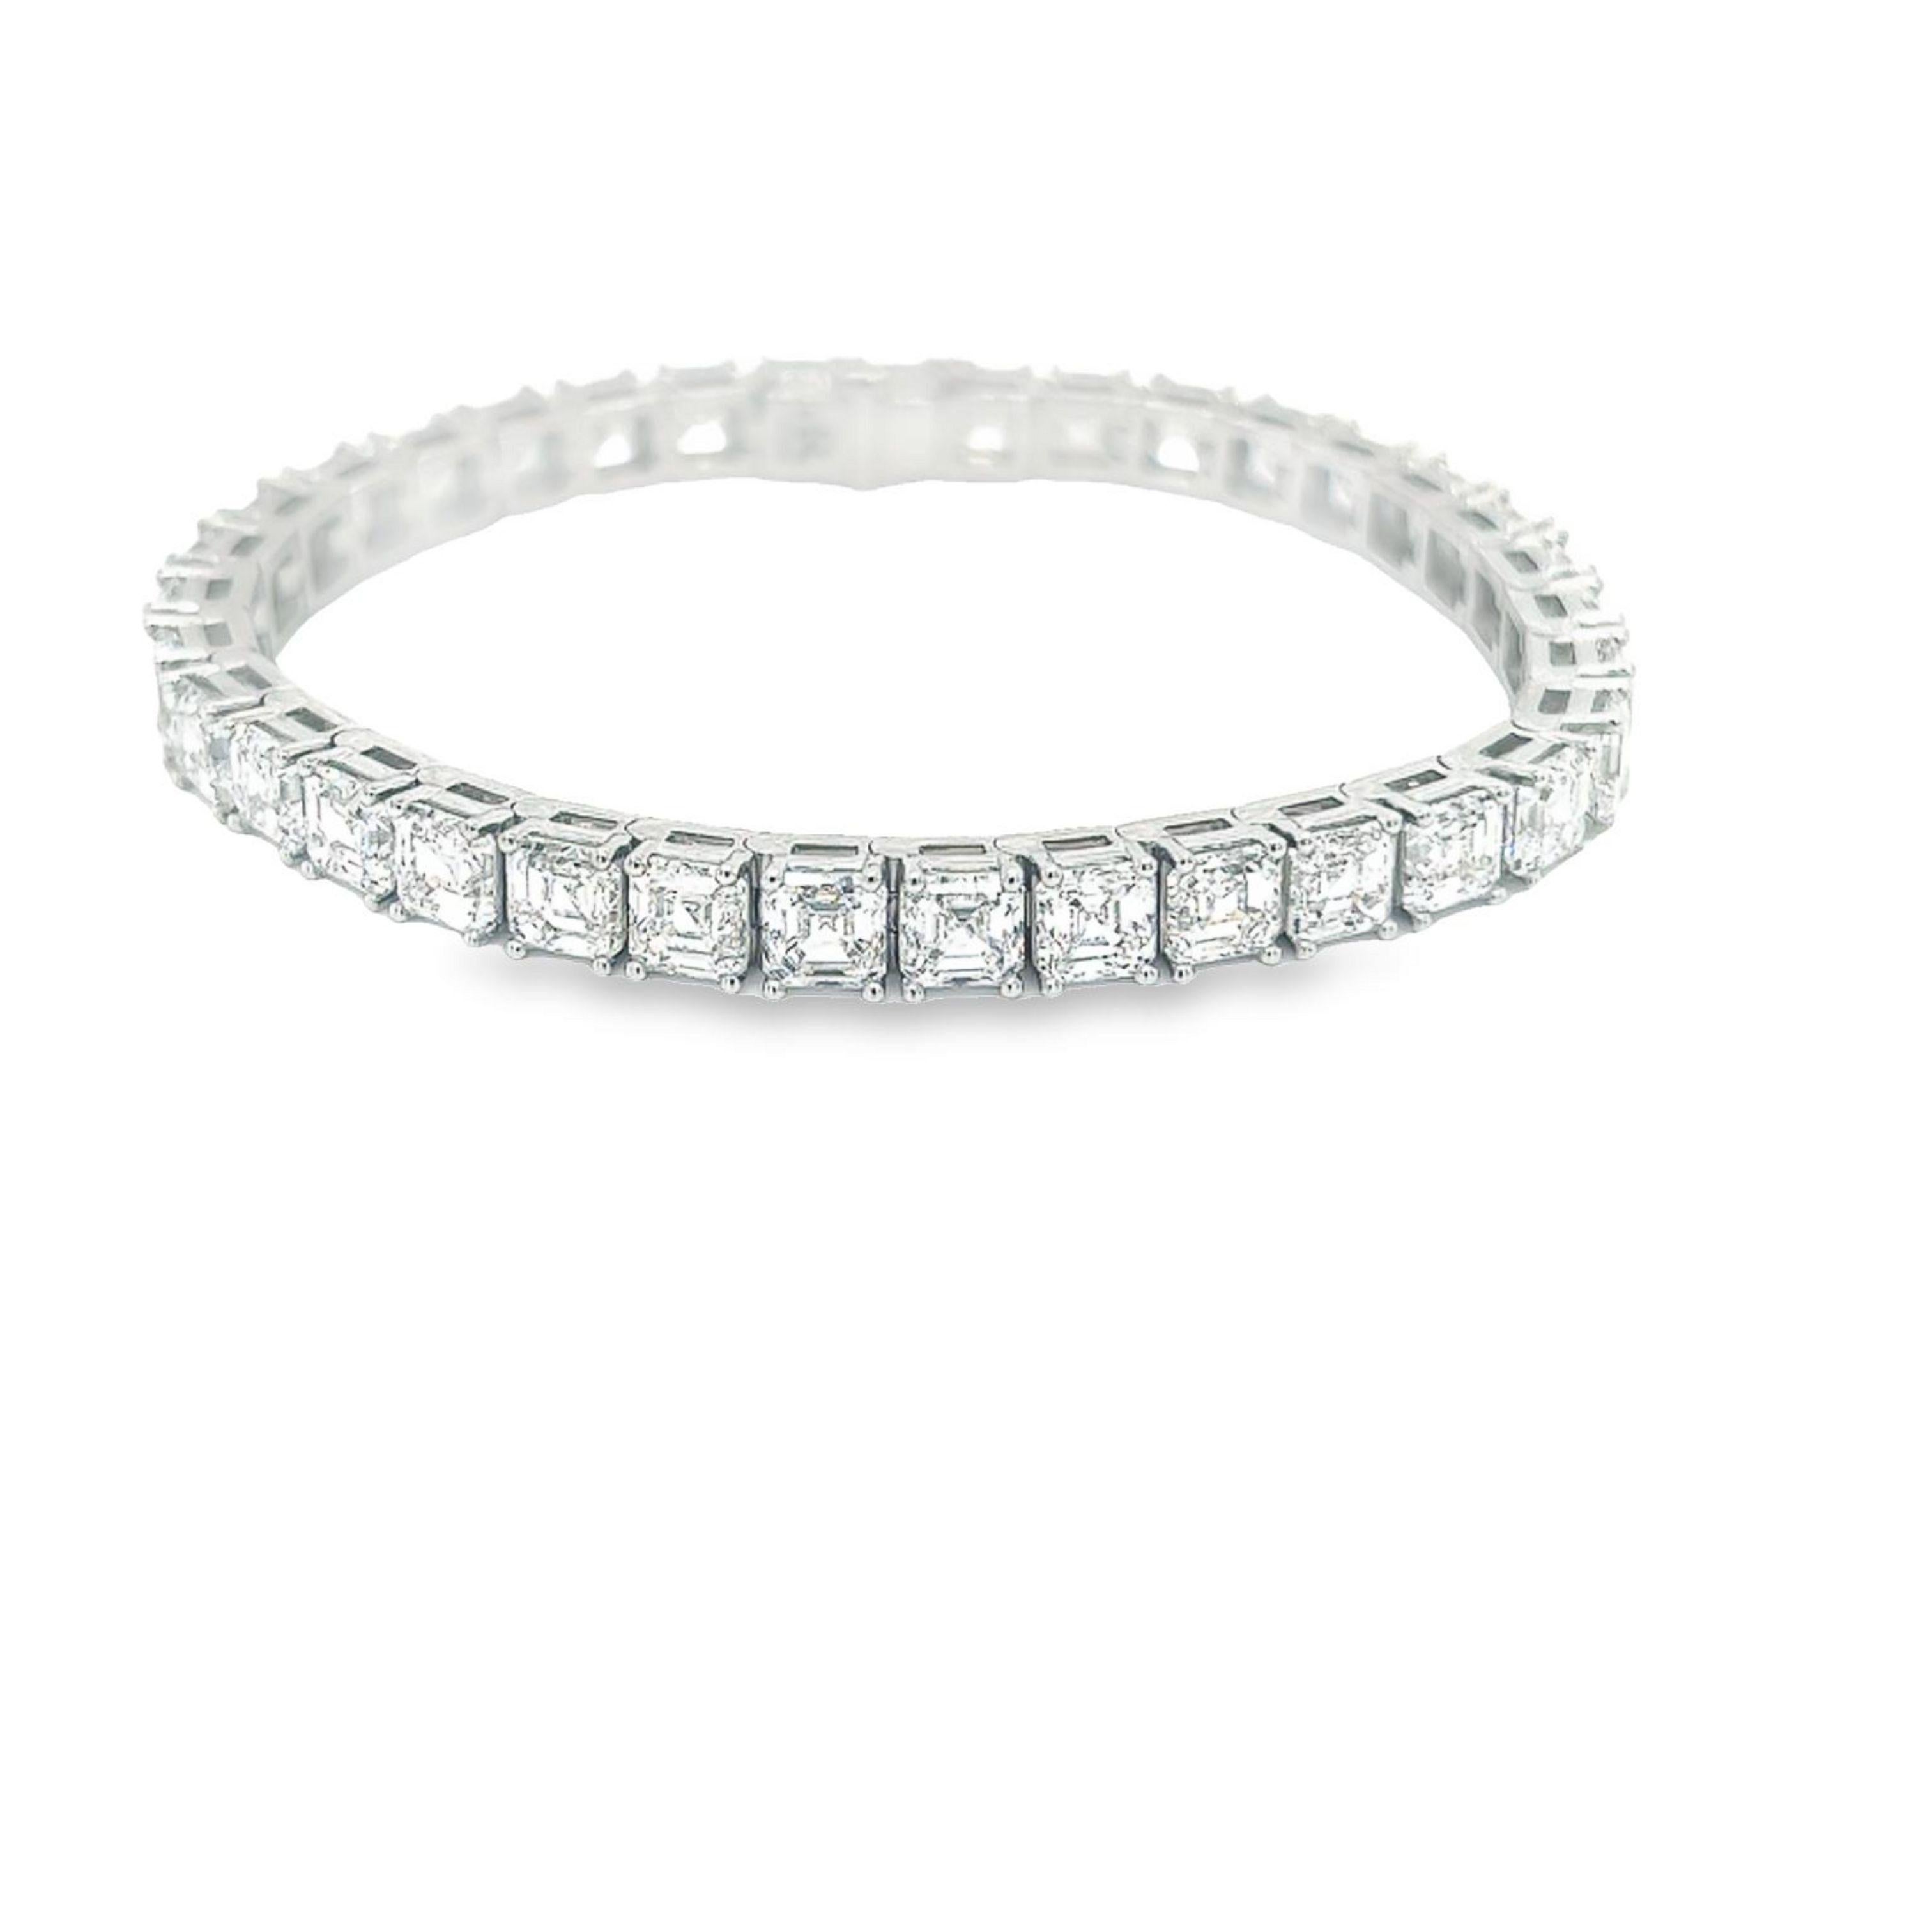 Rosenberg Diamonds & Co. 24.66 carat total weight Asscher cut 7 inch diamond tennis bracelet set in platinum. This beautiful straight line bracelet consists of .70 carats, D-F in color VS2-IF in clarity. Each 35 stones are perfectly matched, top